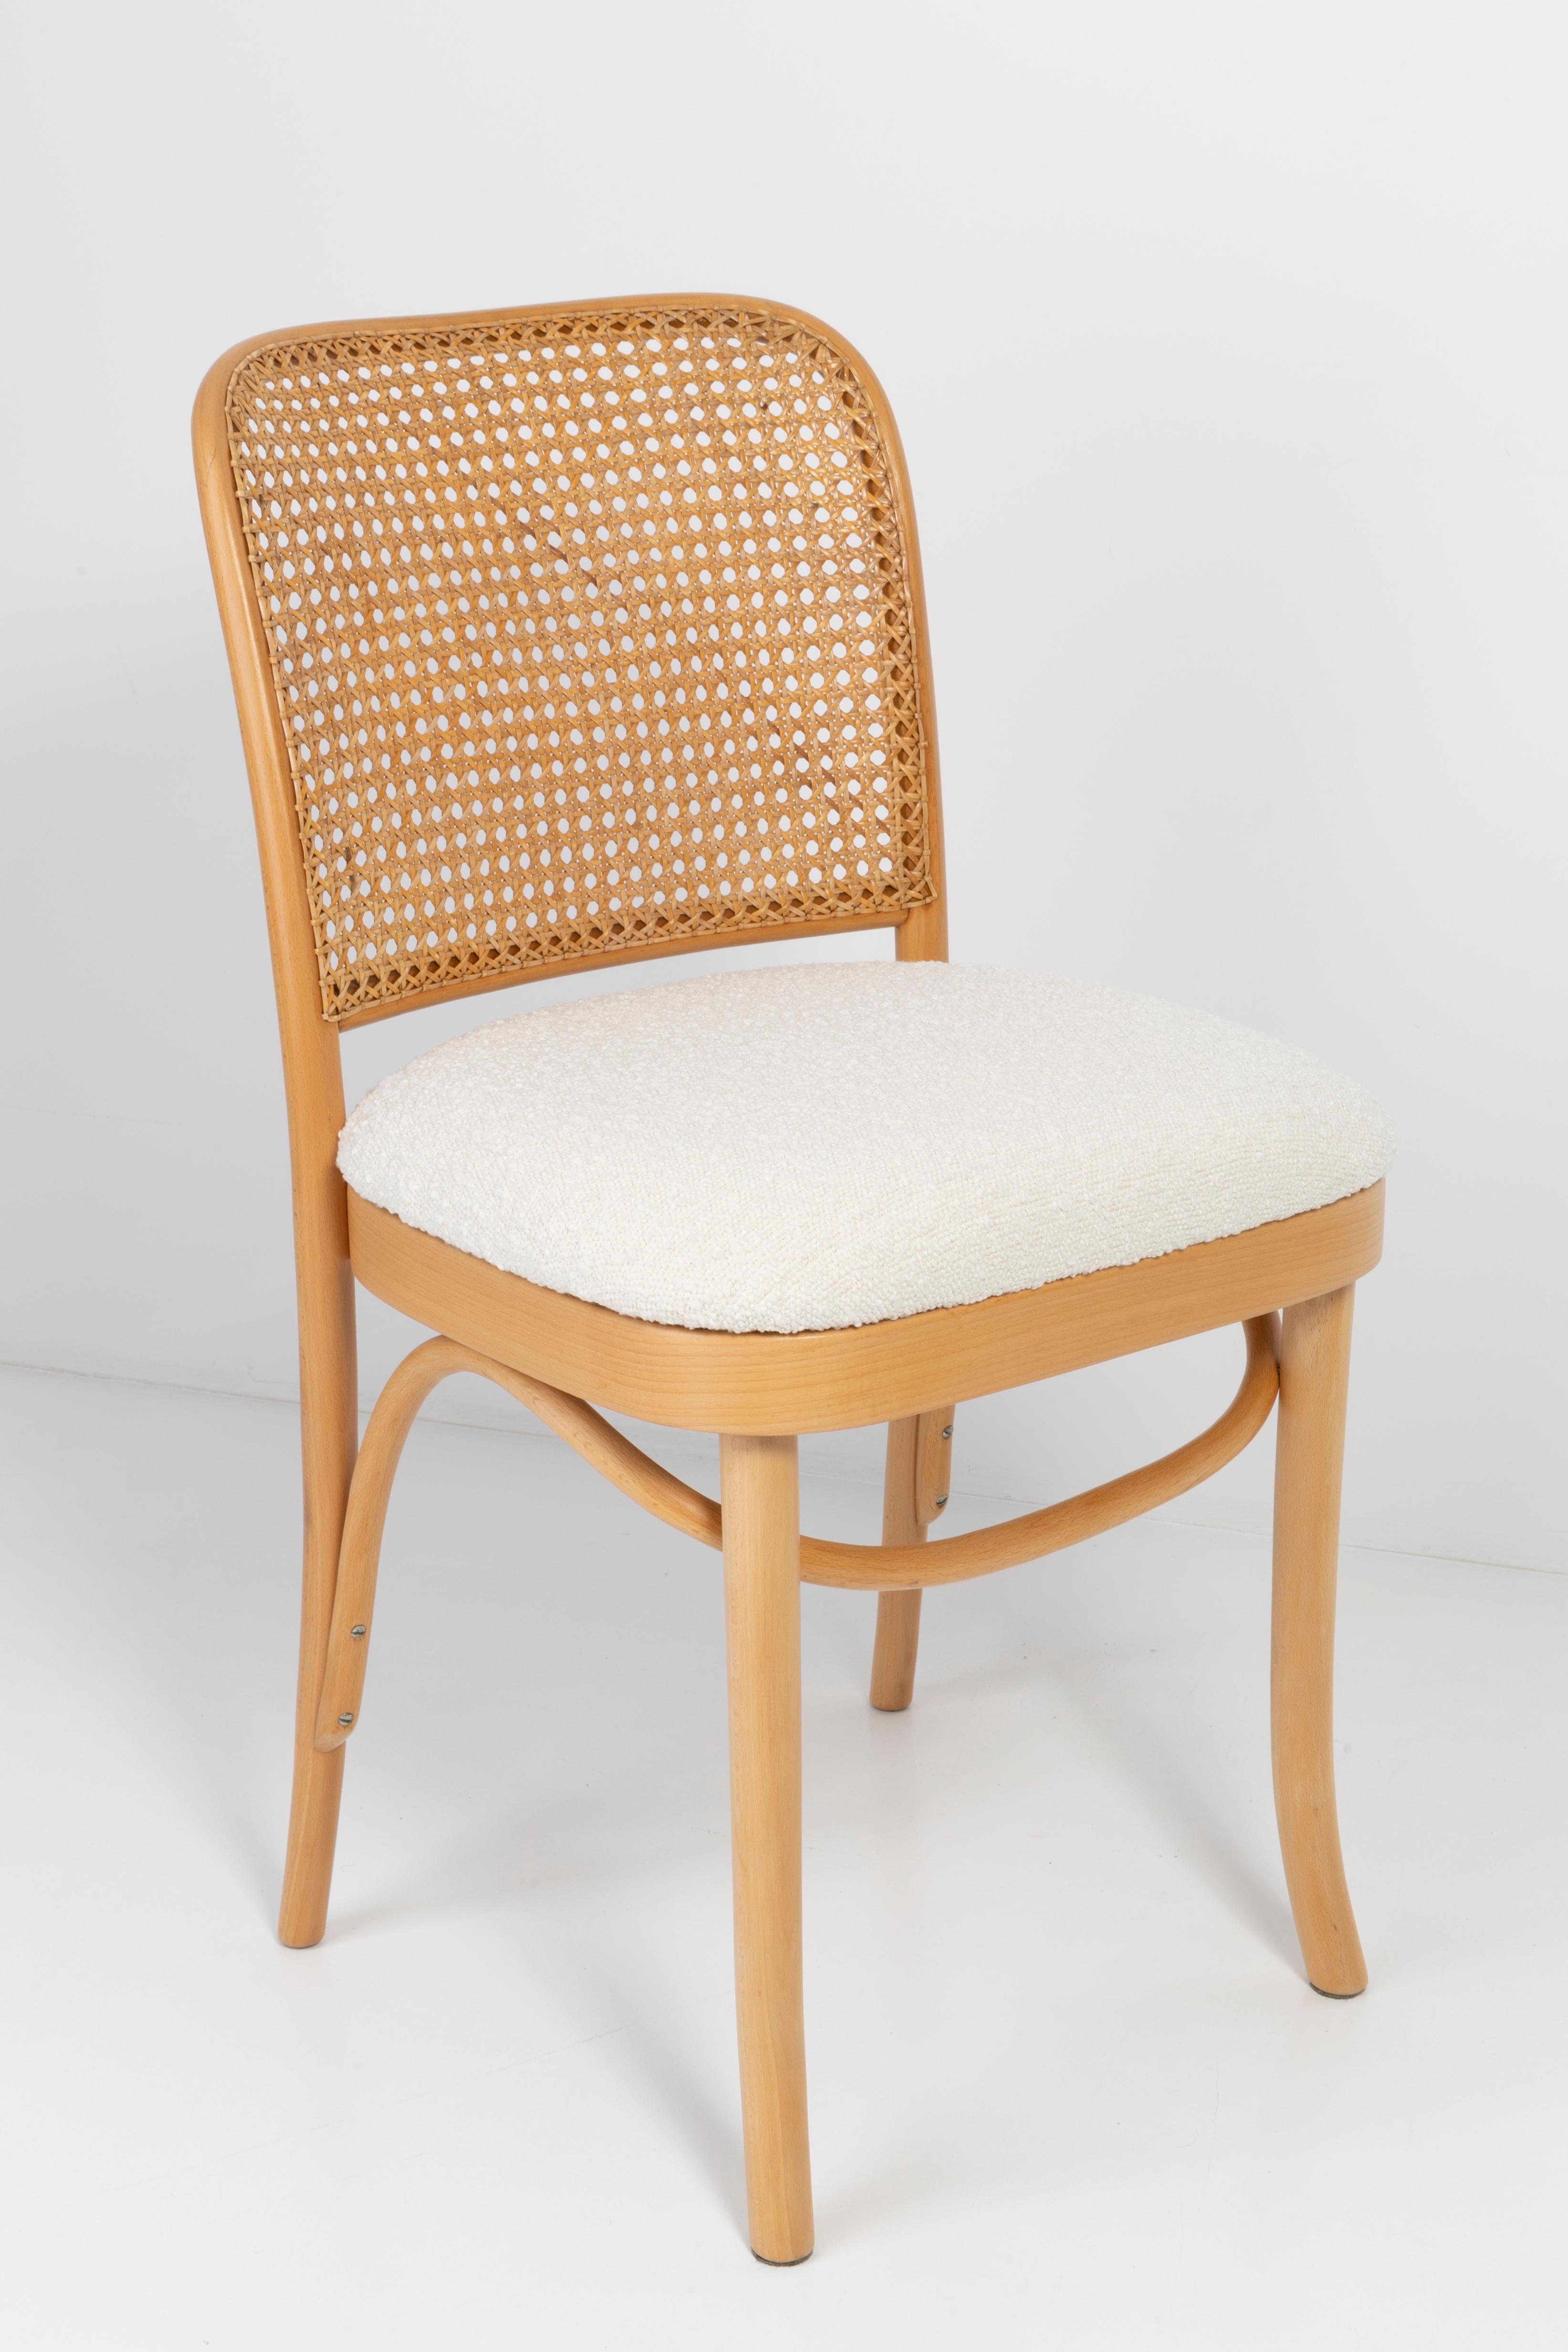 Set of Six White Boucle Thonet Wood Rattan Chairs, 1960s In Excellent Condition For Sale In 05-080 Hornowek, PL